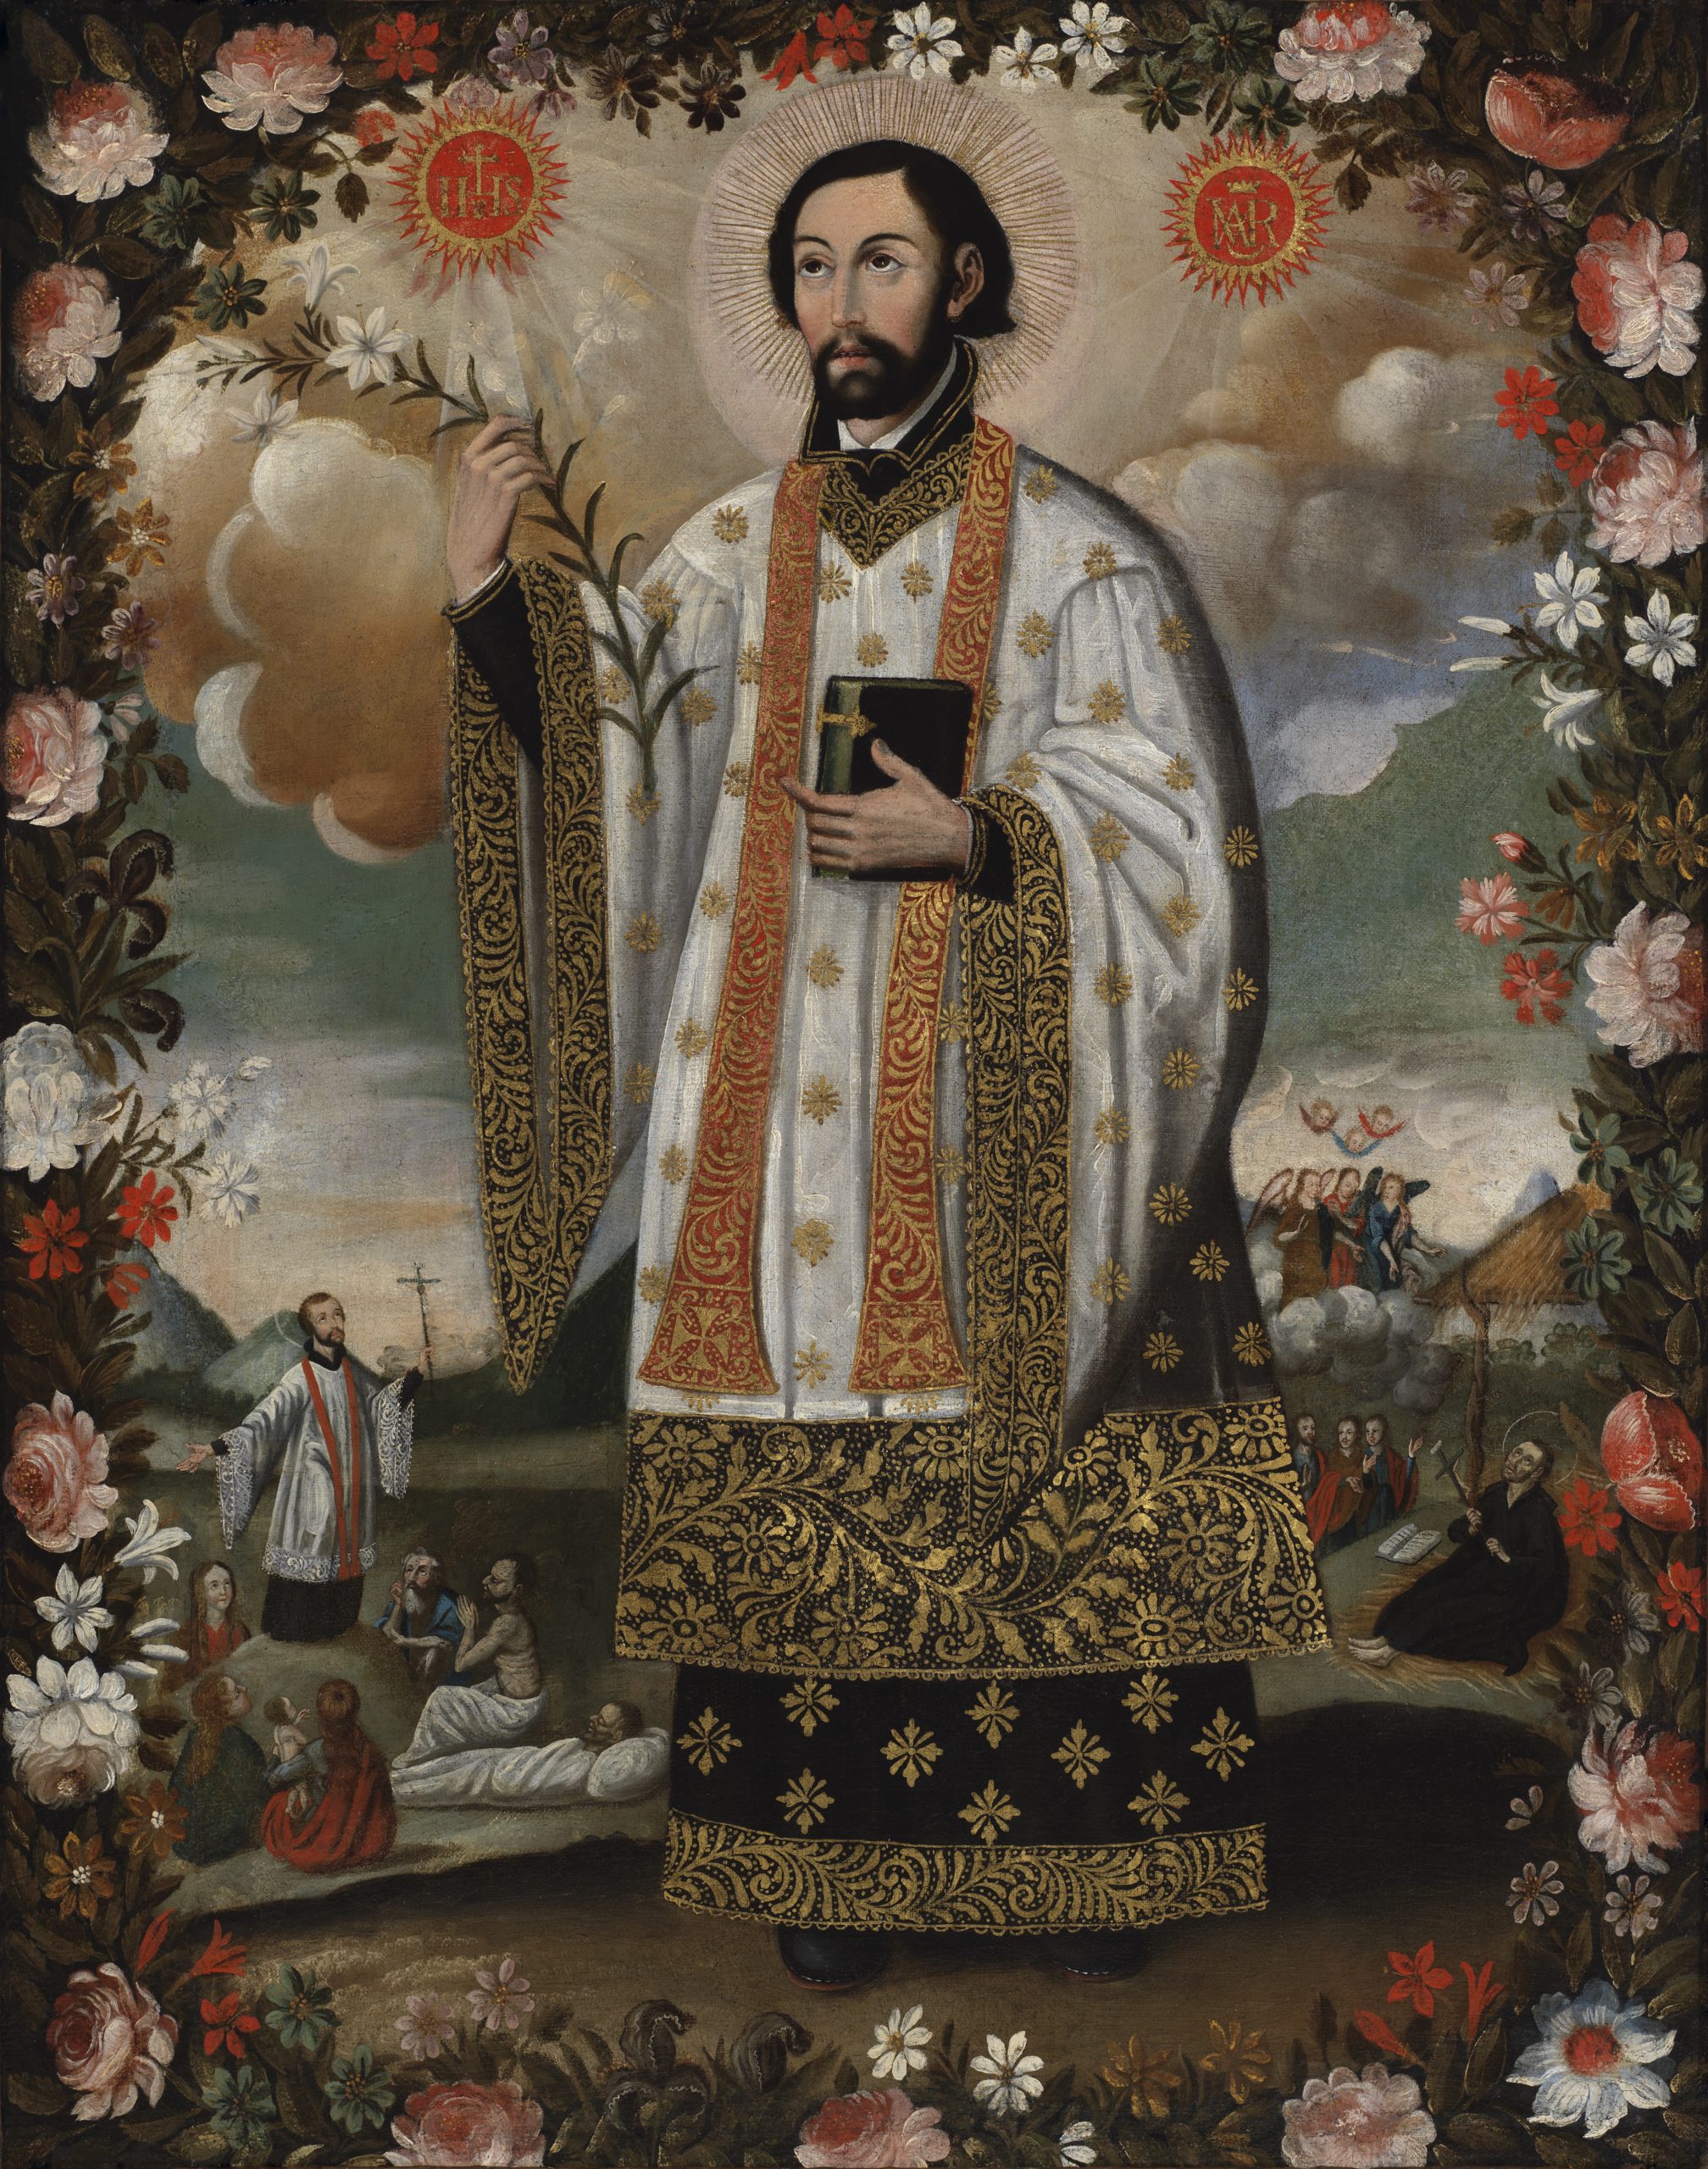 A painting depicting Saint Francis Xavier, the Apostle of the Indies, in front of scenes from his life, and surrounded by a frame of flowers.